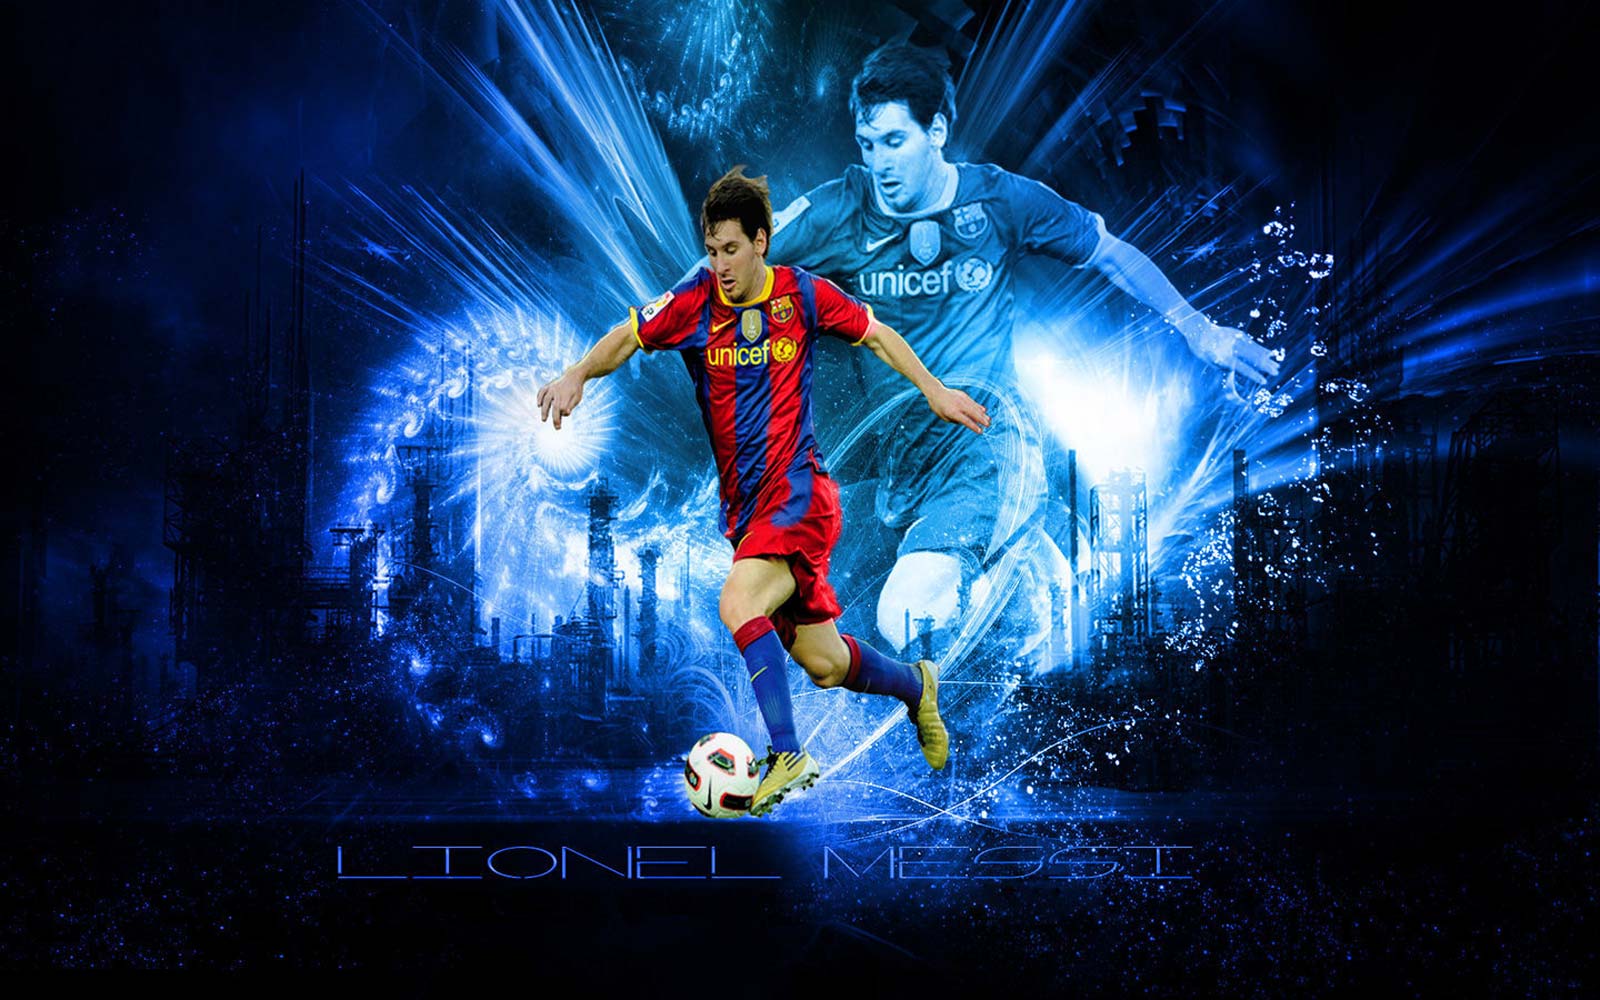 all wallpaper hd,football player,fictional character,graphic design,soccer player,football